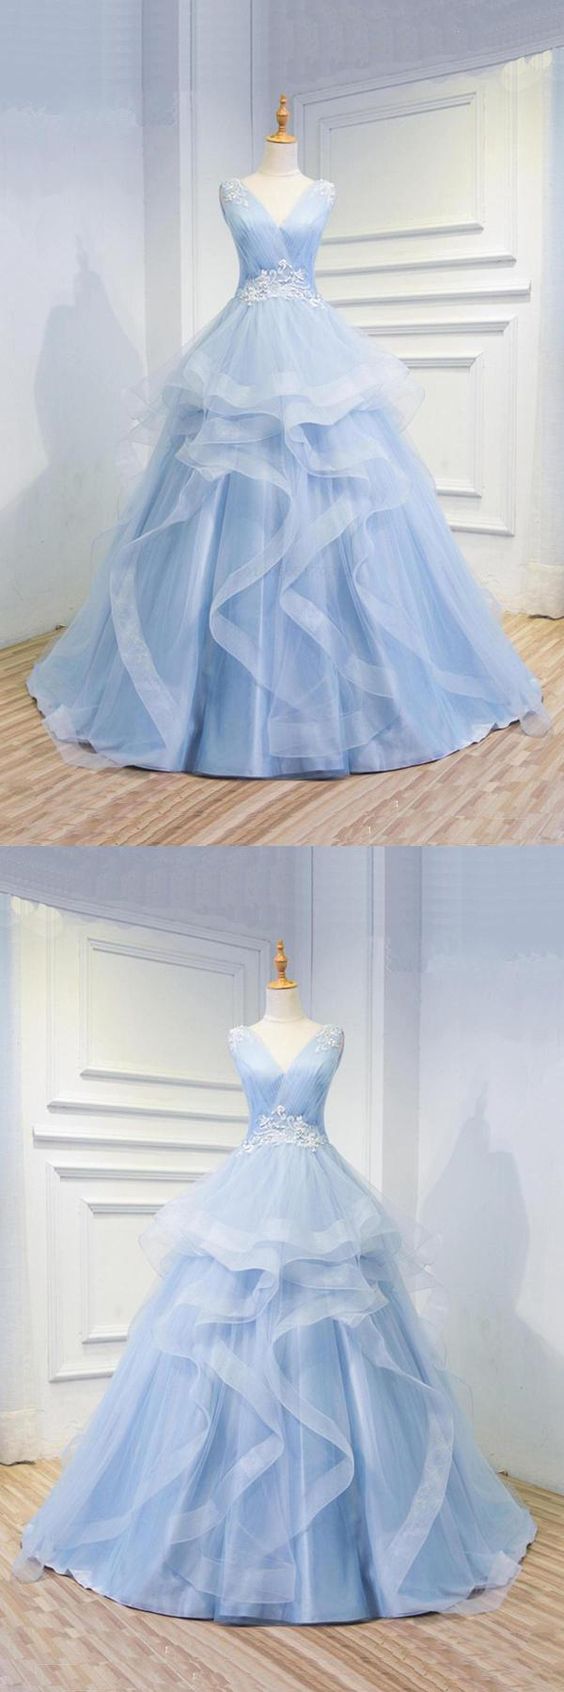 Light Blue Organza Ball Gown Prom Dress,custom Made Prom Party Gowns , Sexy V-neck Quinceanera Dress For 16 Years